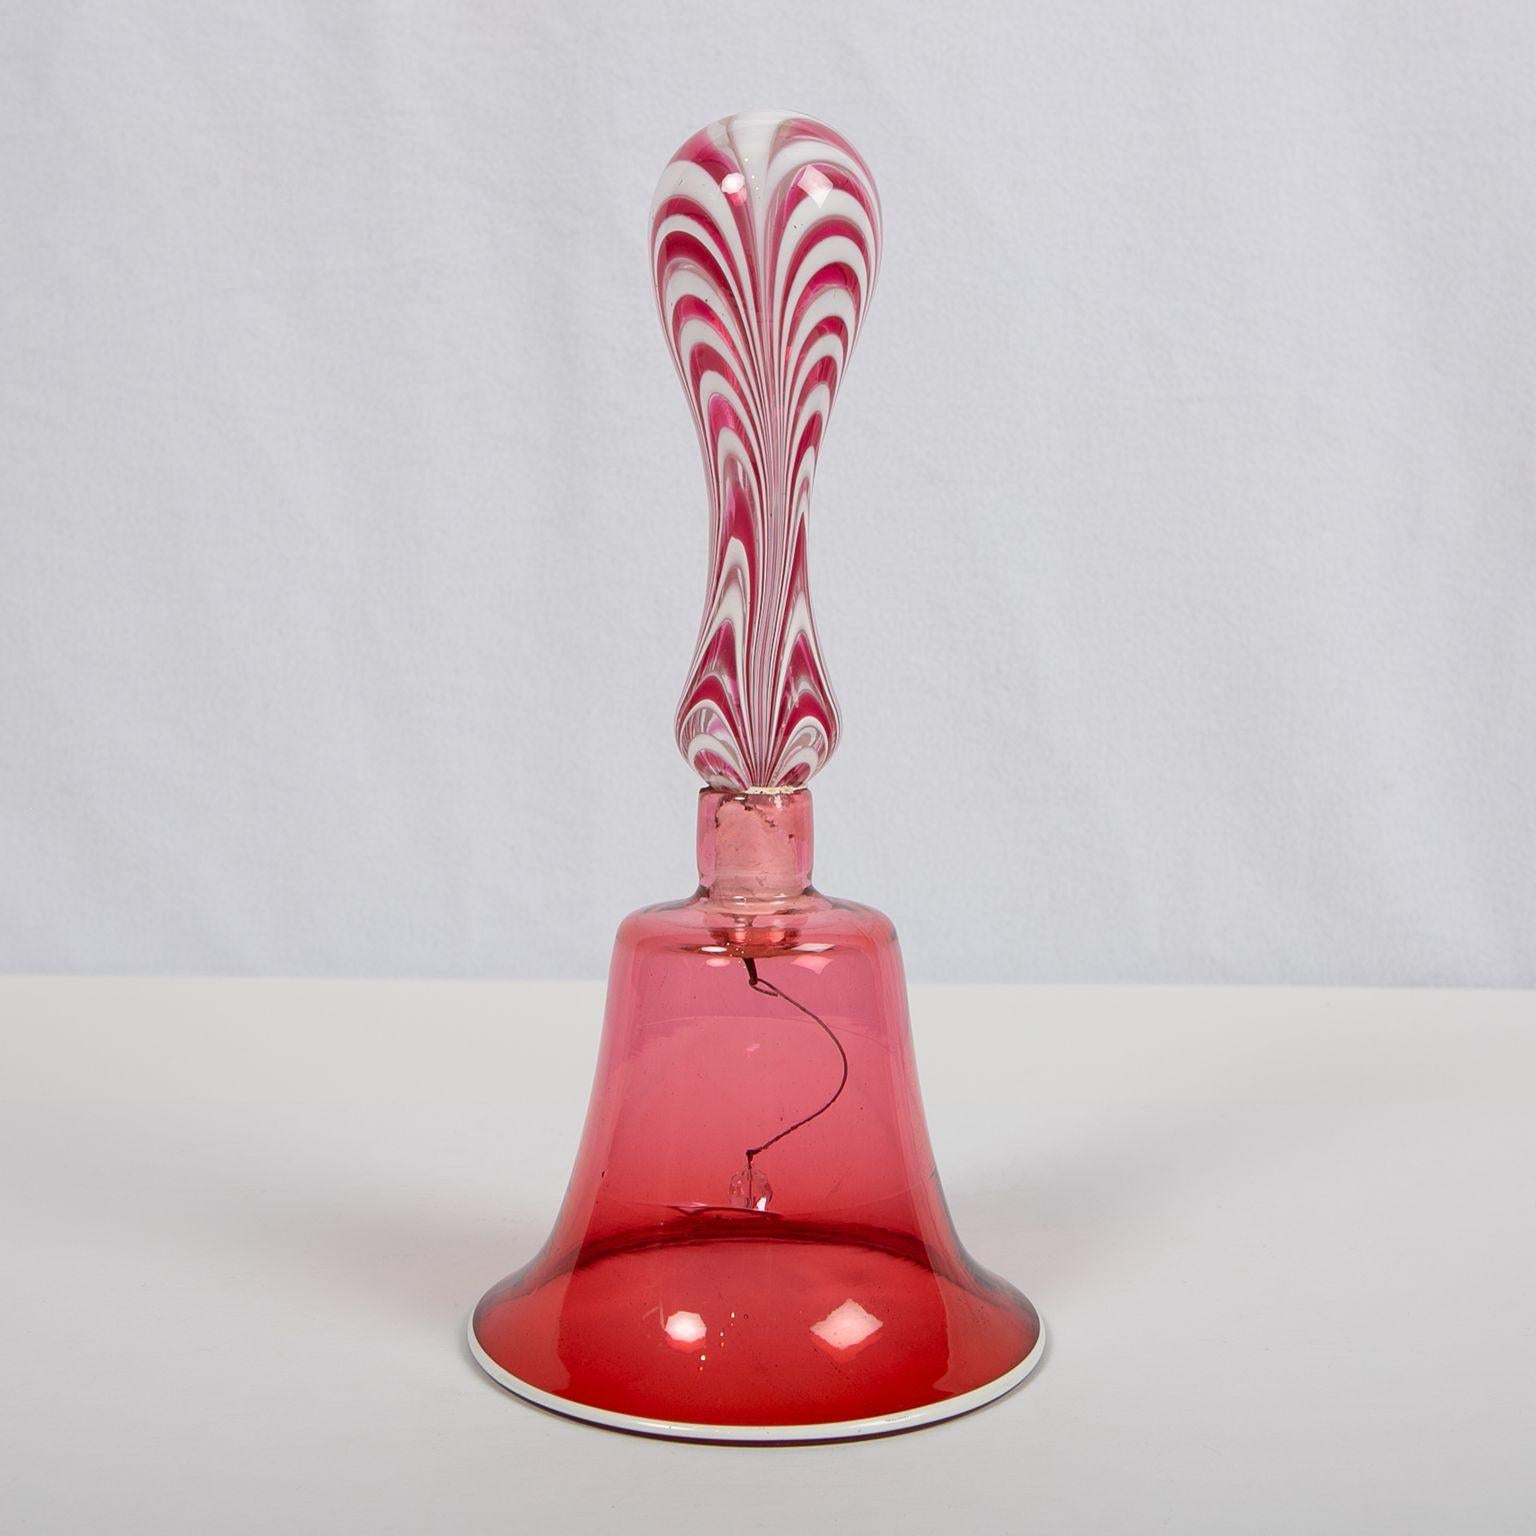 This handmade blown glass wedding bell was made in England at the Nailsea Glassworks, circa 1840. The shape of the bell and handle is elegant. The deep red color of the bell is exquisite. The handle looks like peppermint with swirled red and white